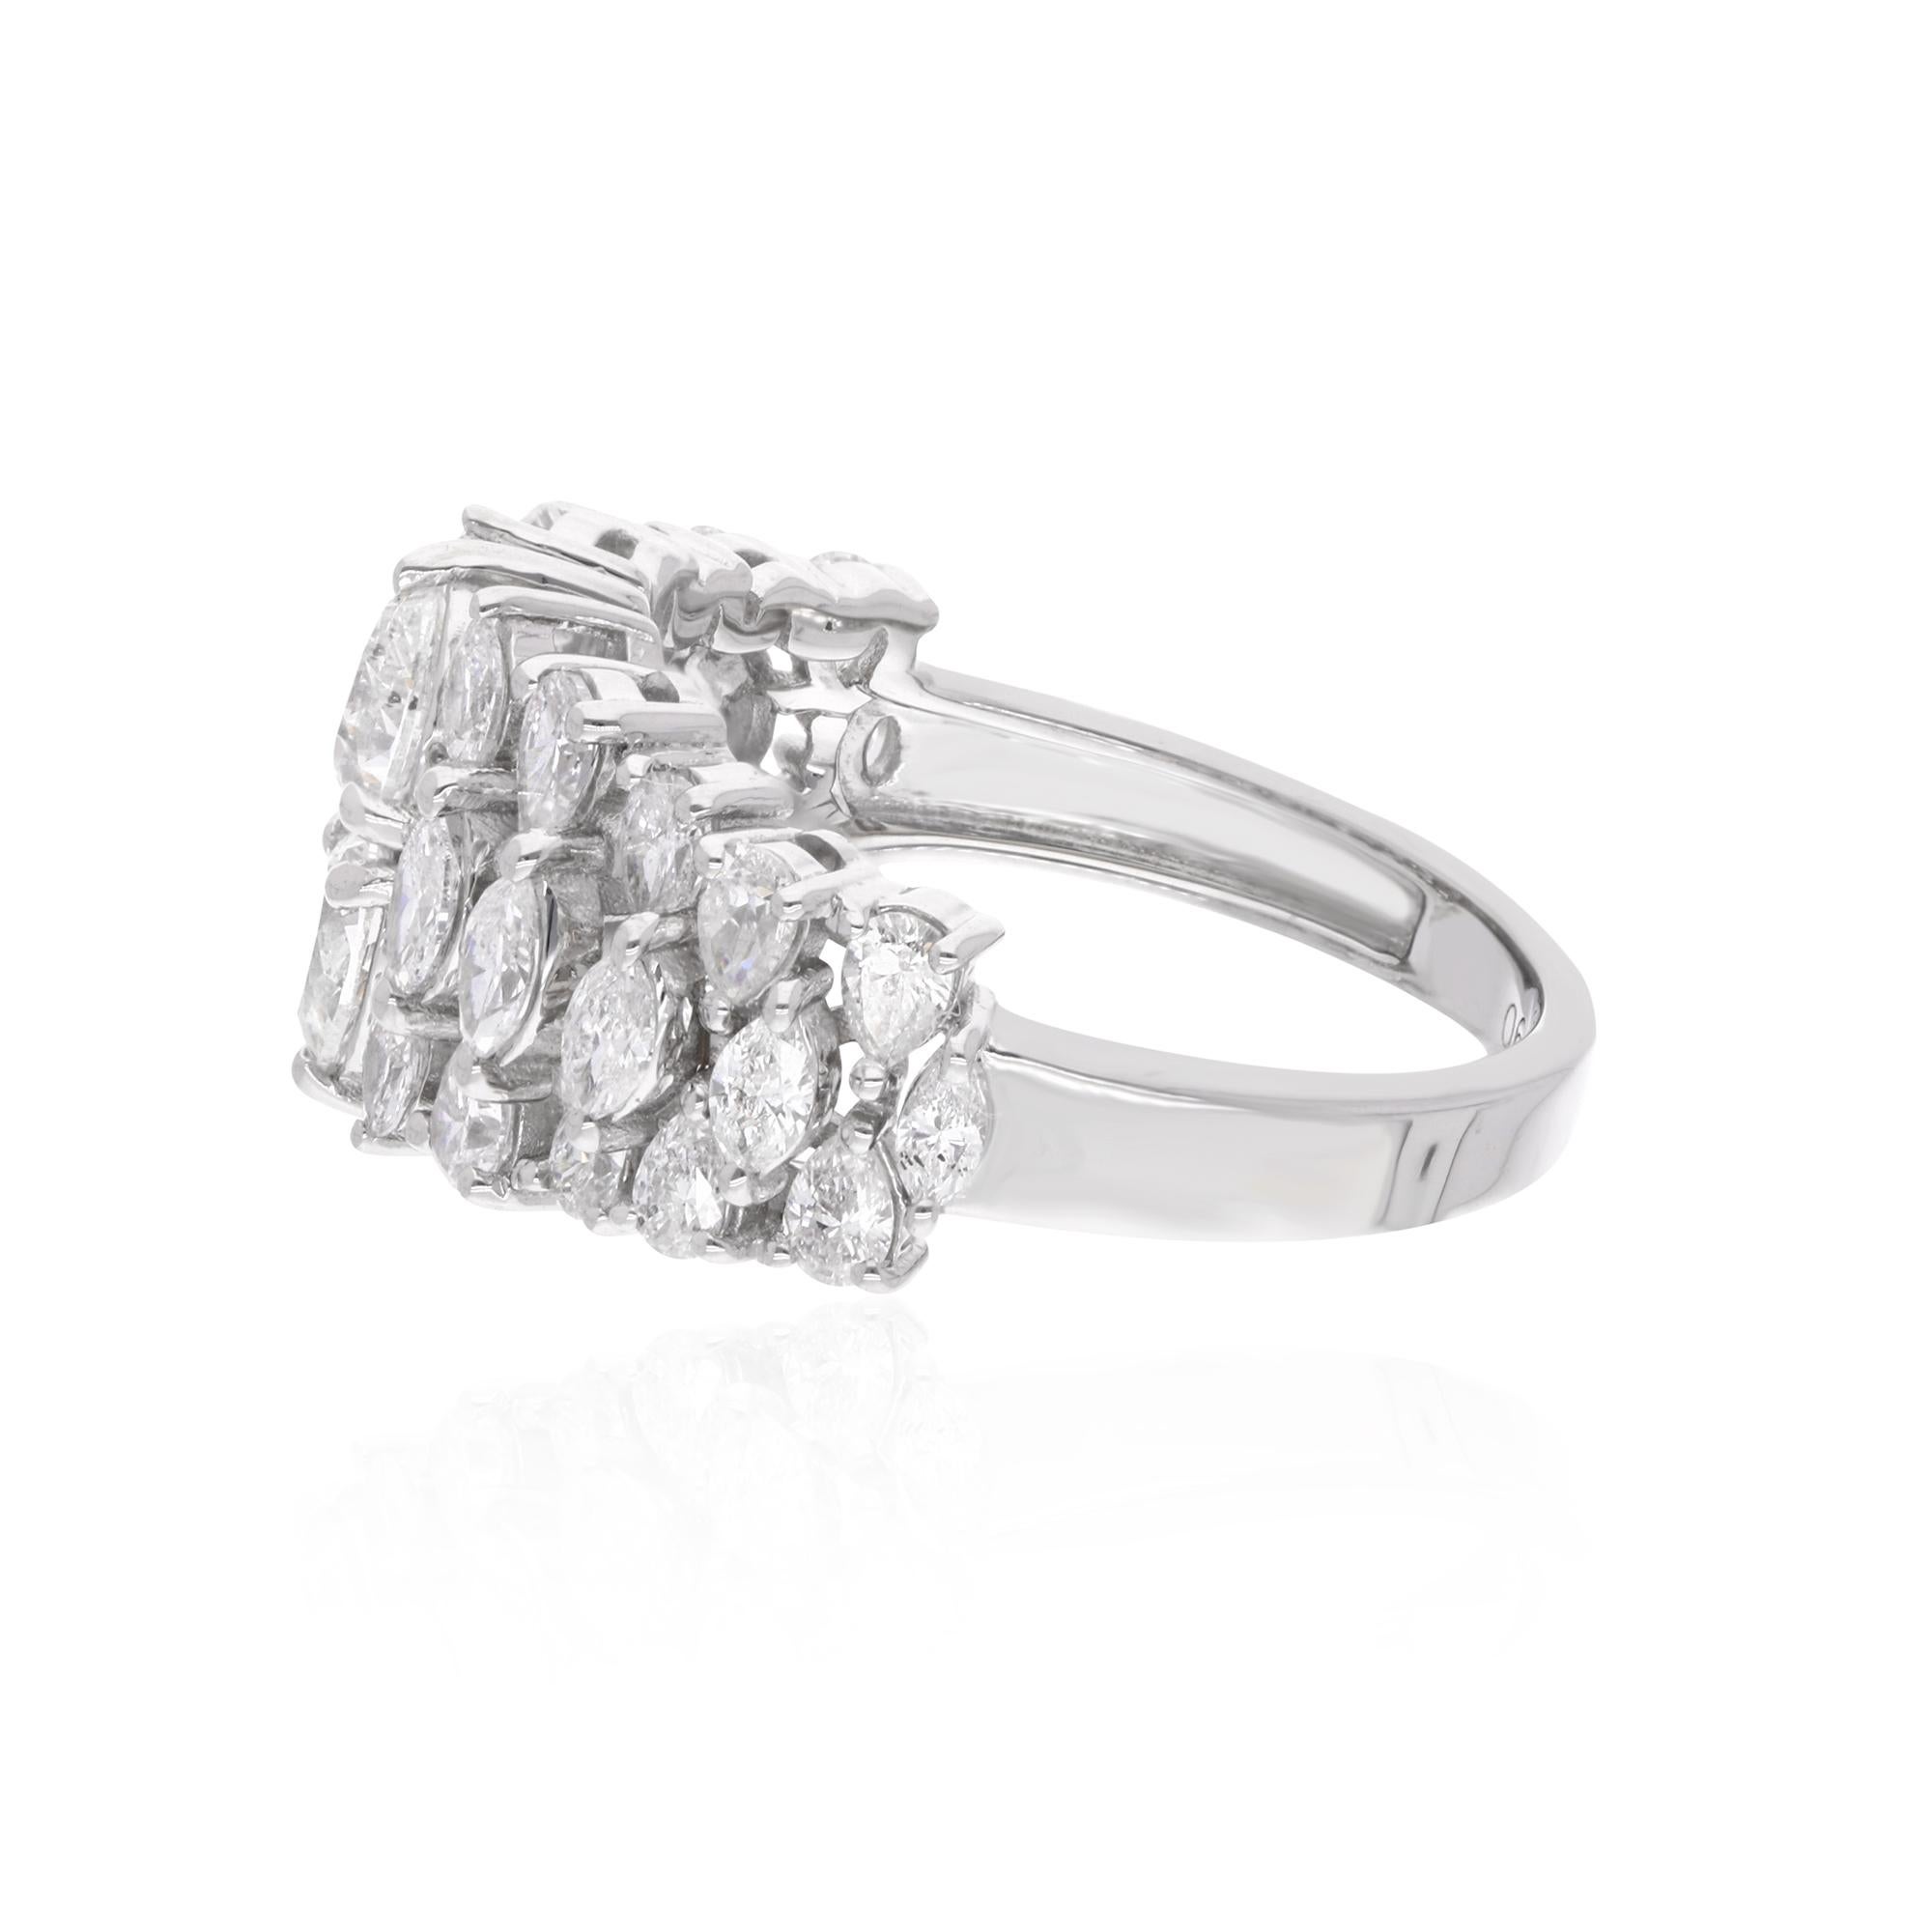 The graceful curvature of the dome ring gracefully hugs the finger, while the lustrous white gold setting provides a perfect backdrop for the radiant sparkle of the diamonds. Each diamond, with its SI clarity and H-I color grading, exhibits